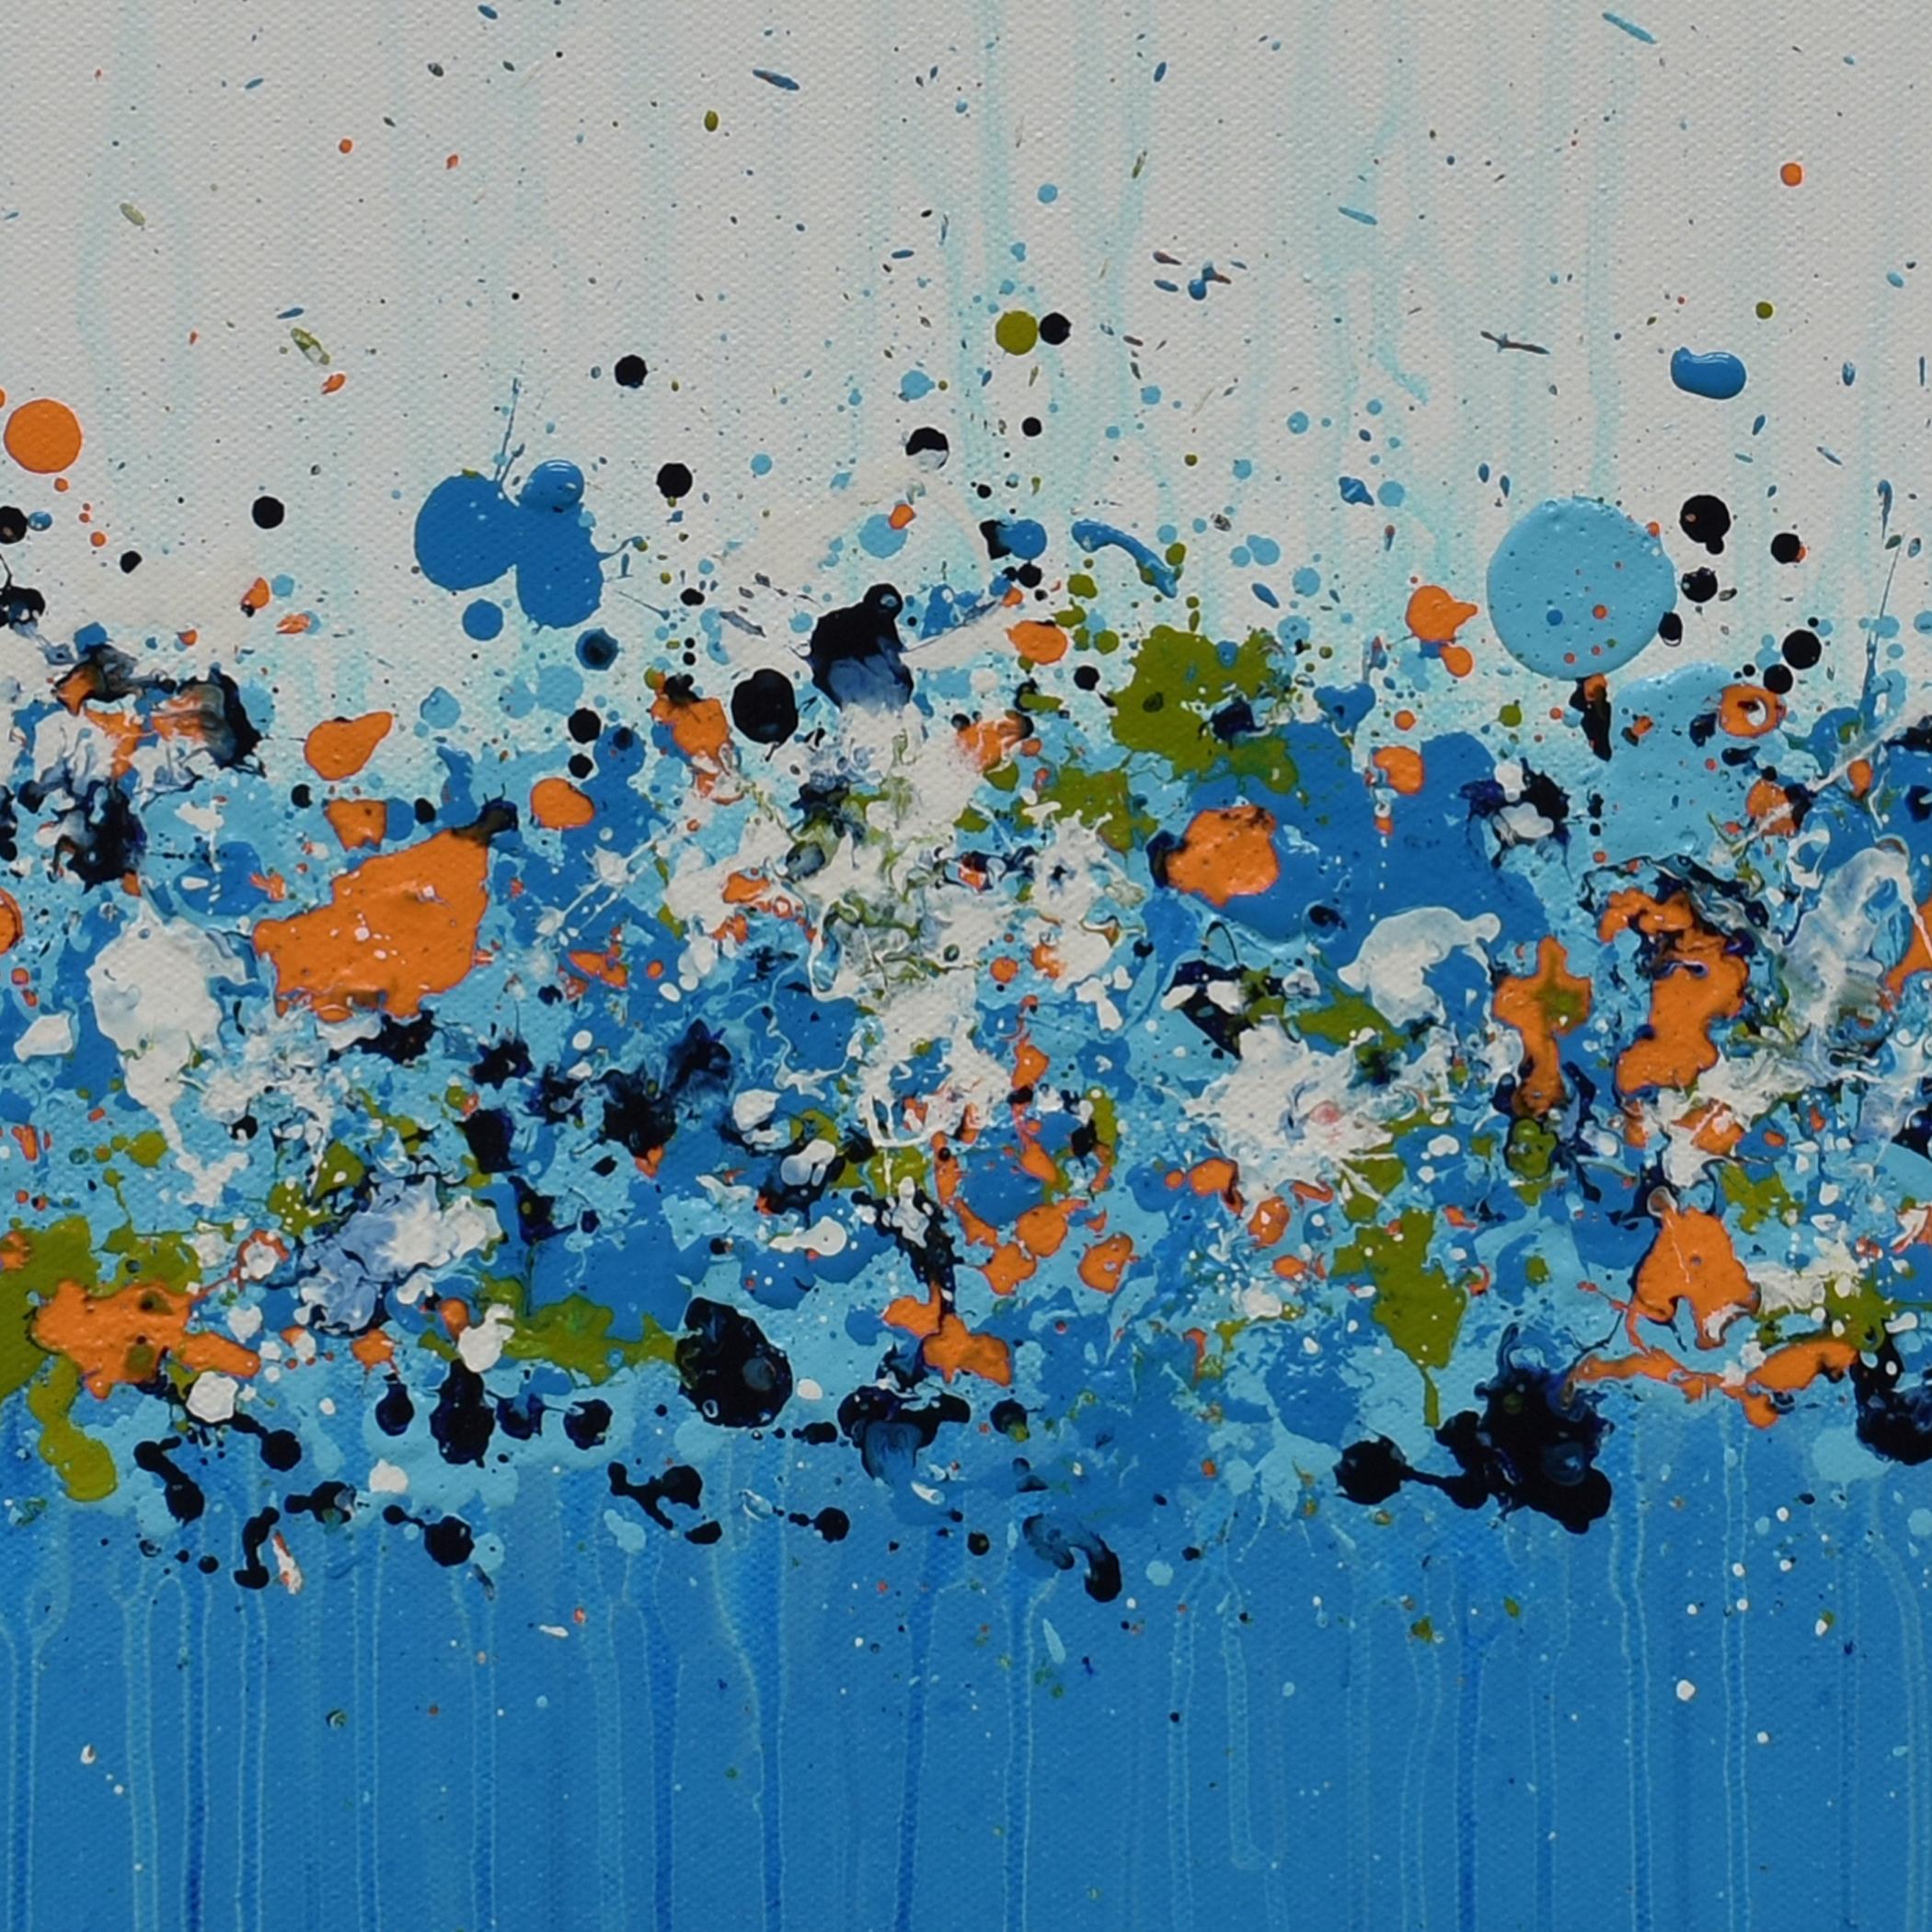 <p>Artist Comments<br />Artist Lisa Carney displays a floral abstract in playful blue splatters. Part of her lush and colorful GeoFlora series. She spontaneously splashes paint onto the canvas to color the free-spirited composition. Accents of green